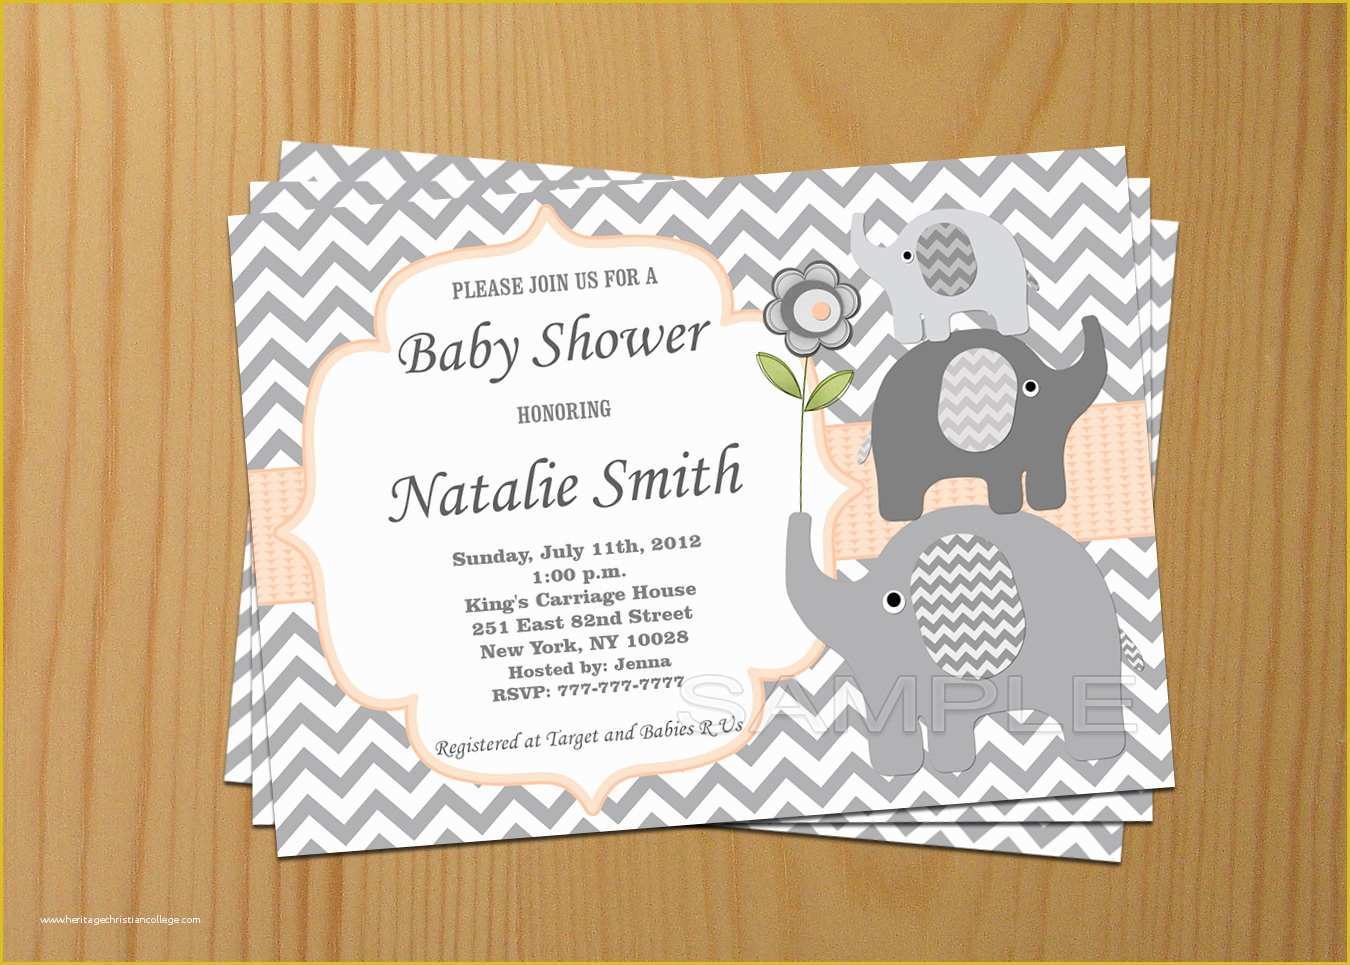 Baby Shower Invitation Card Template Free Download Of Able Baby Shower Invitations Downloadable Baby